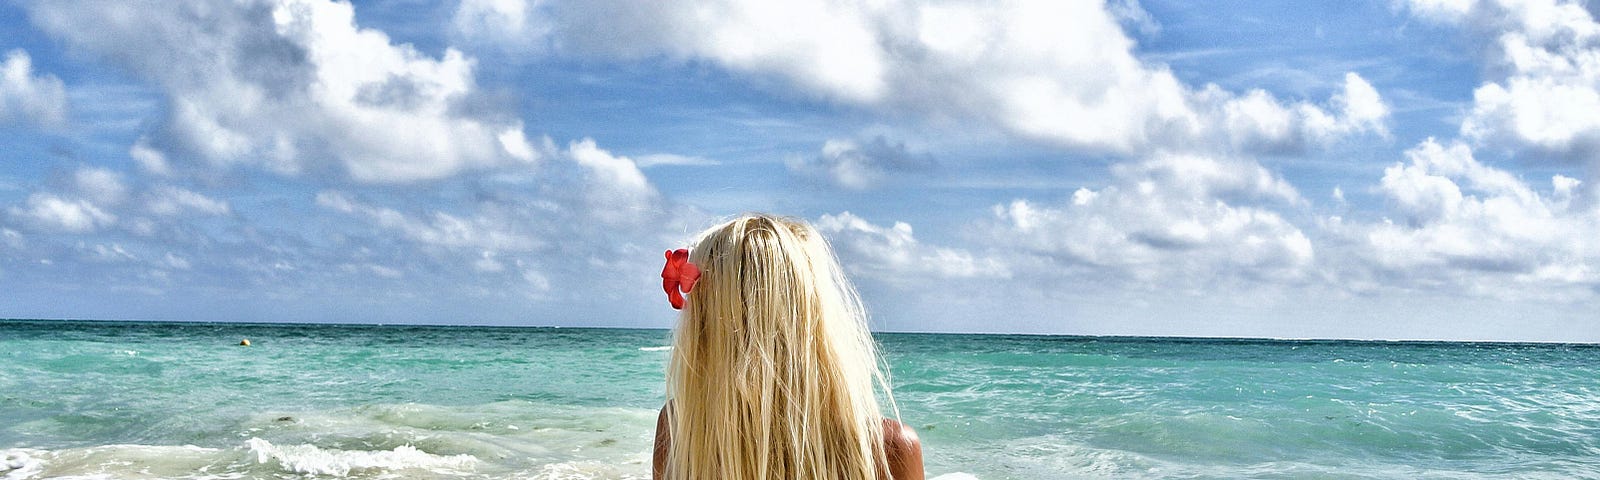 Blonde woman in a swimsuit meditating in front of the ocean.